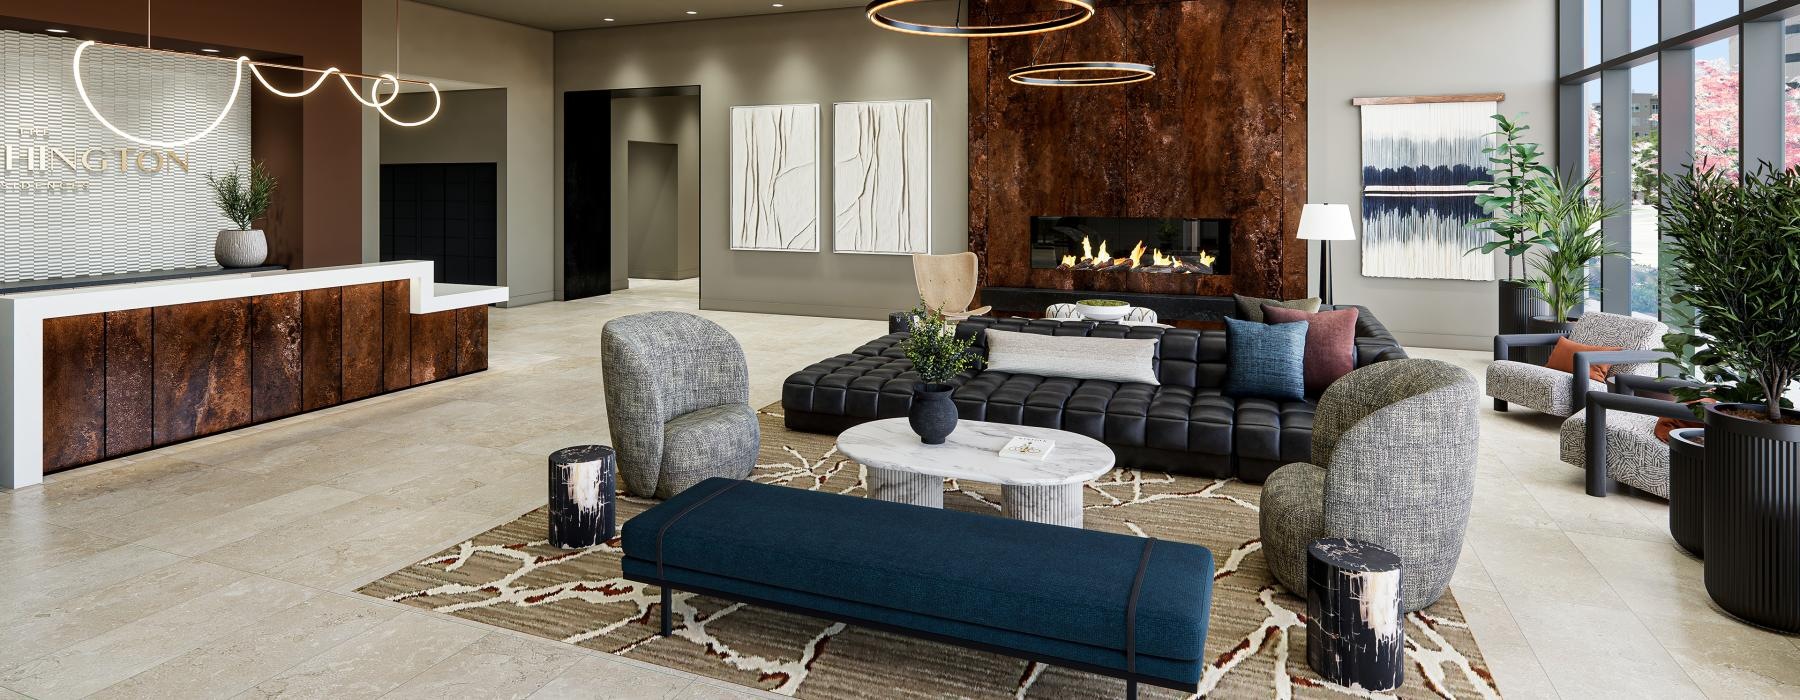 stylish lobby with fireplace and concierge desk